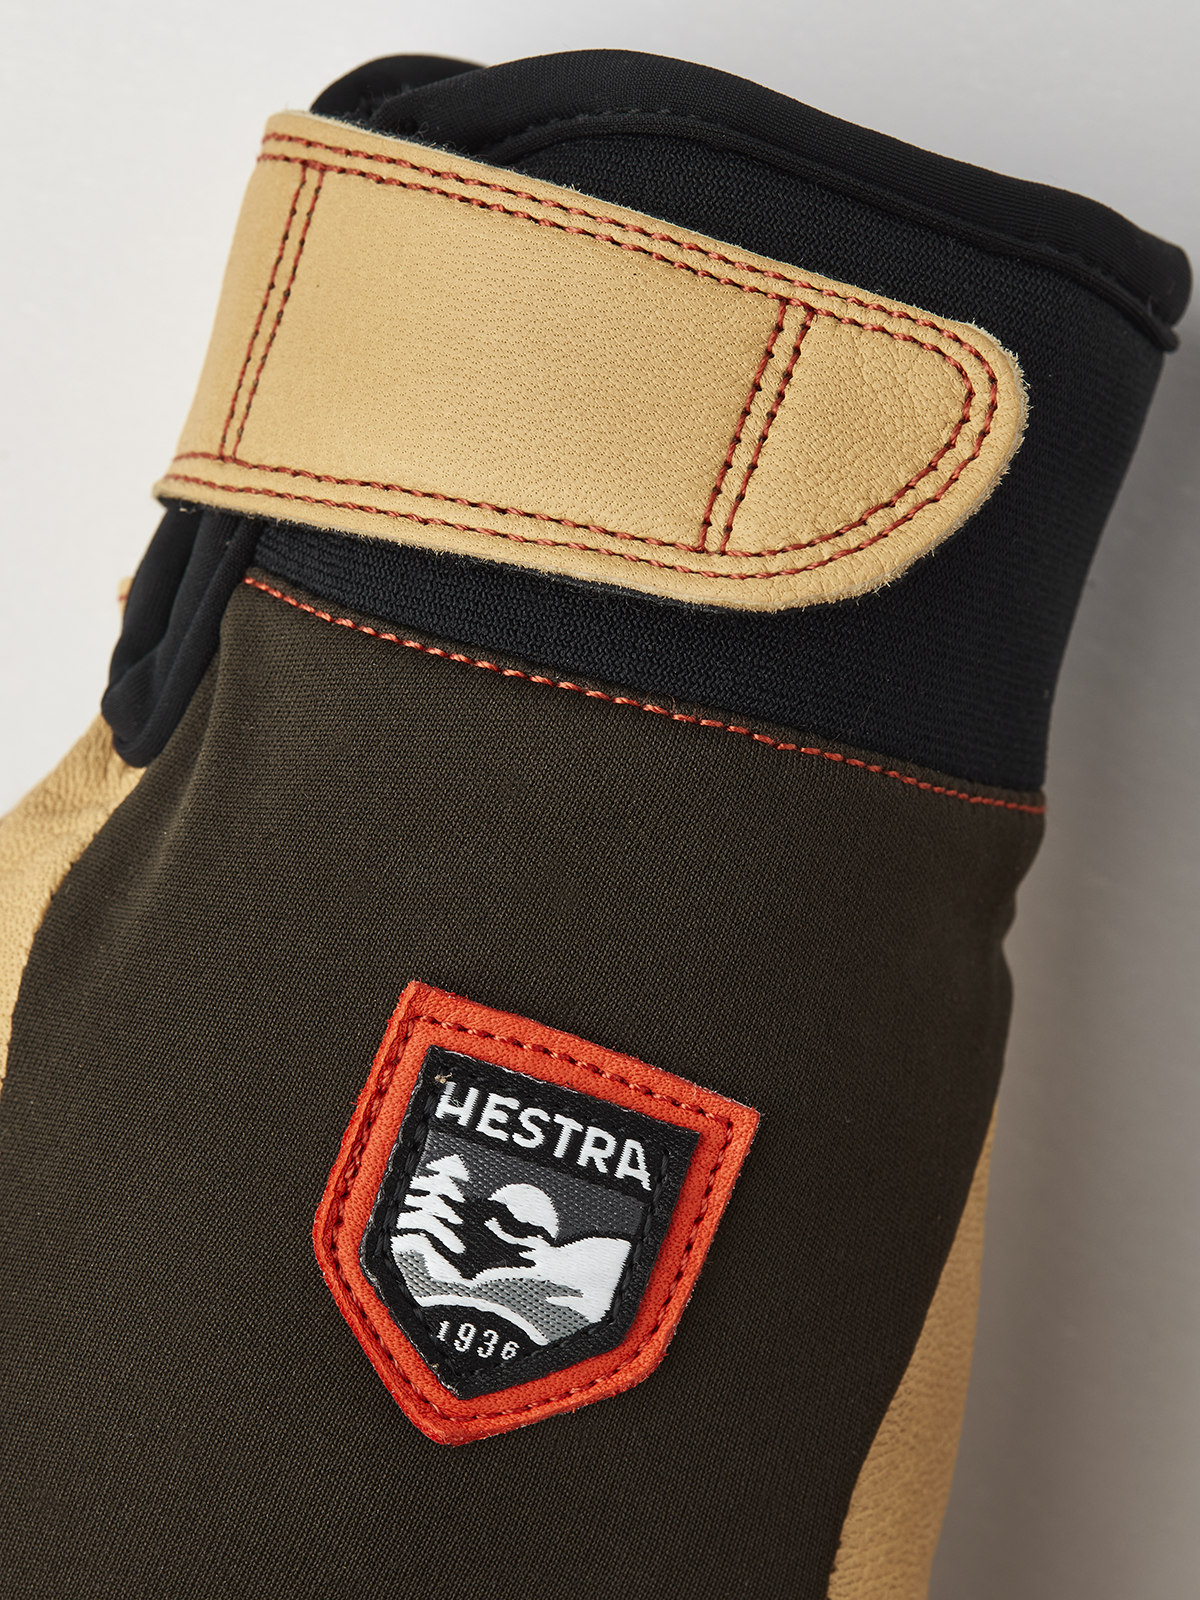 and Running Kayaking Hestra Ergo Grip Active Glove Durable 5-Finger Outdoors Glove for Hiking 